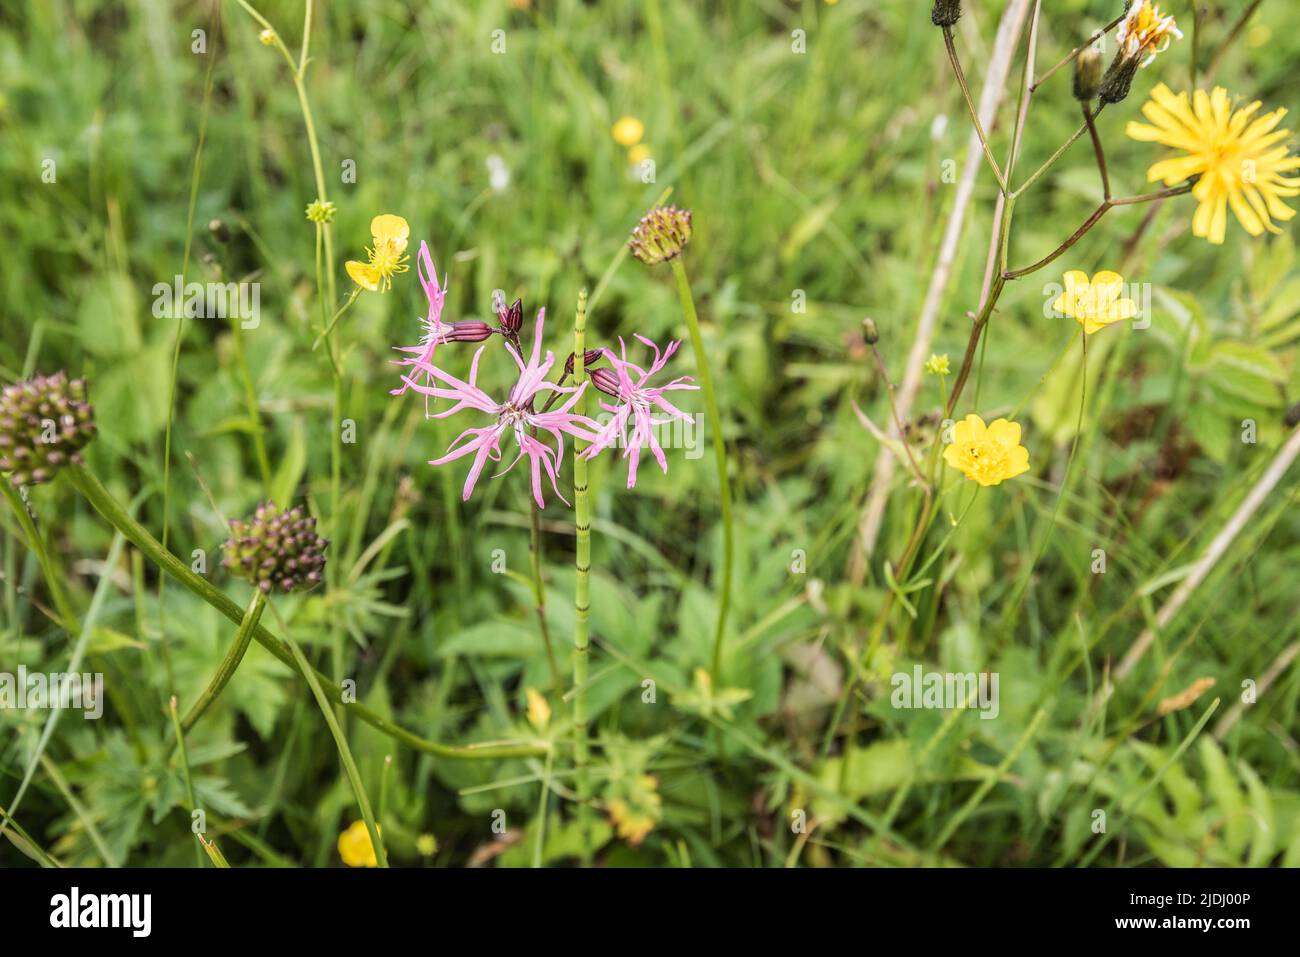 The pink, frayed flowers of Ragged-robin,also known as Lychnis flos-cuculi., are an increasingly rare sight as our wild wetland habitats disappear. Stock Photo